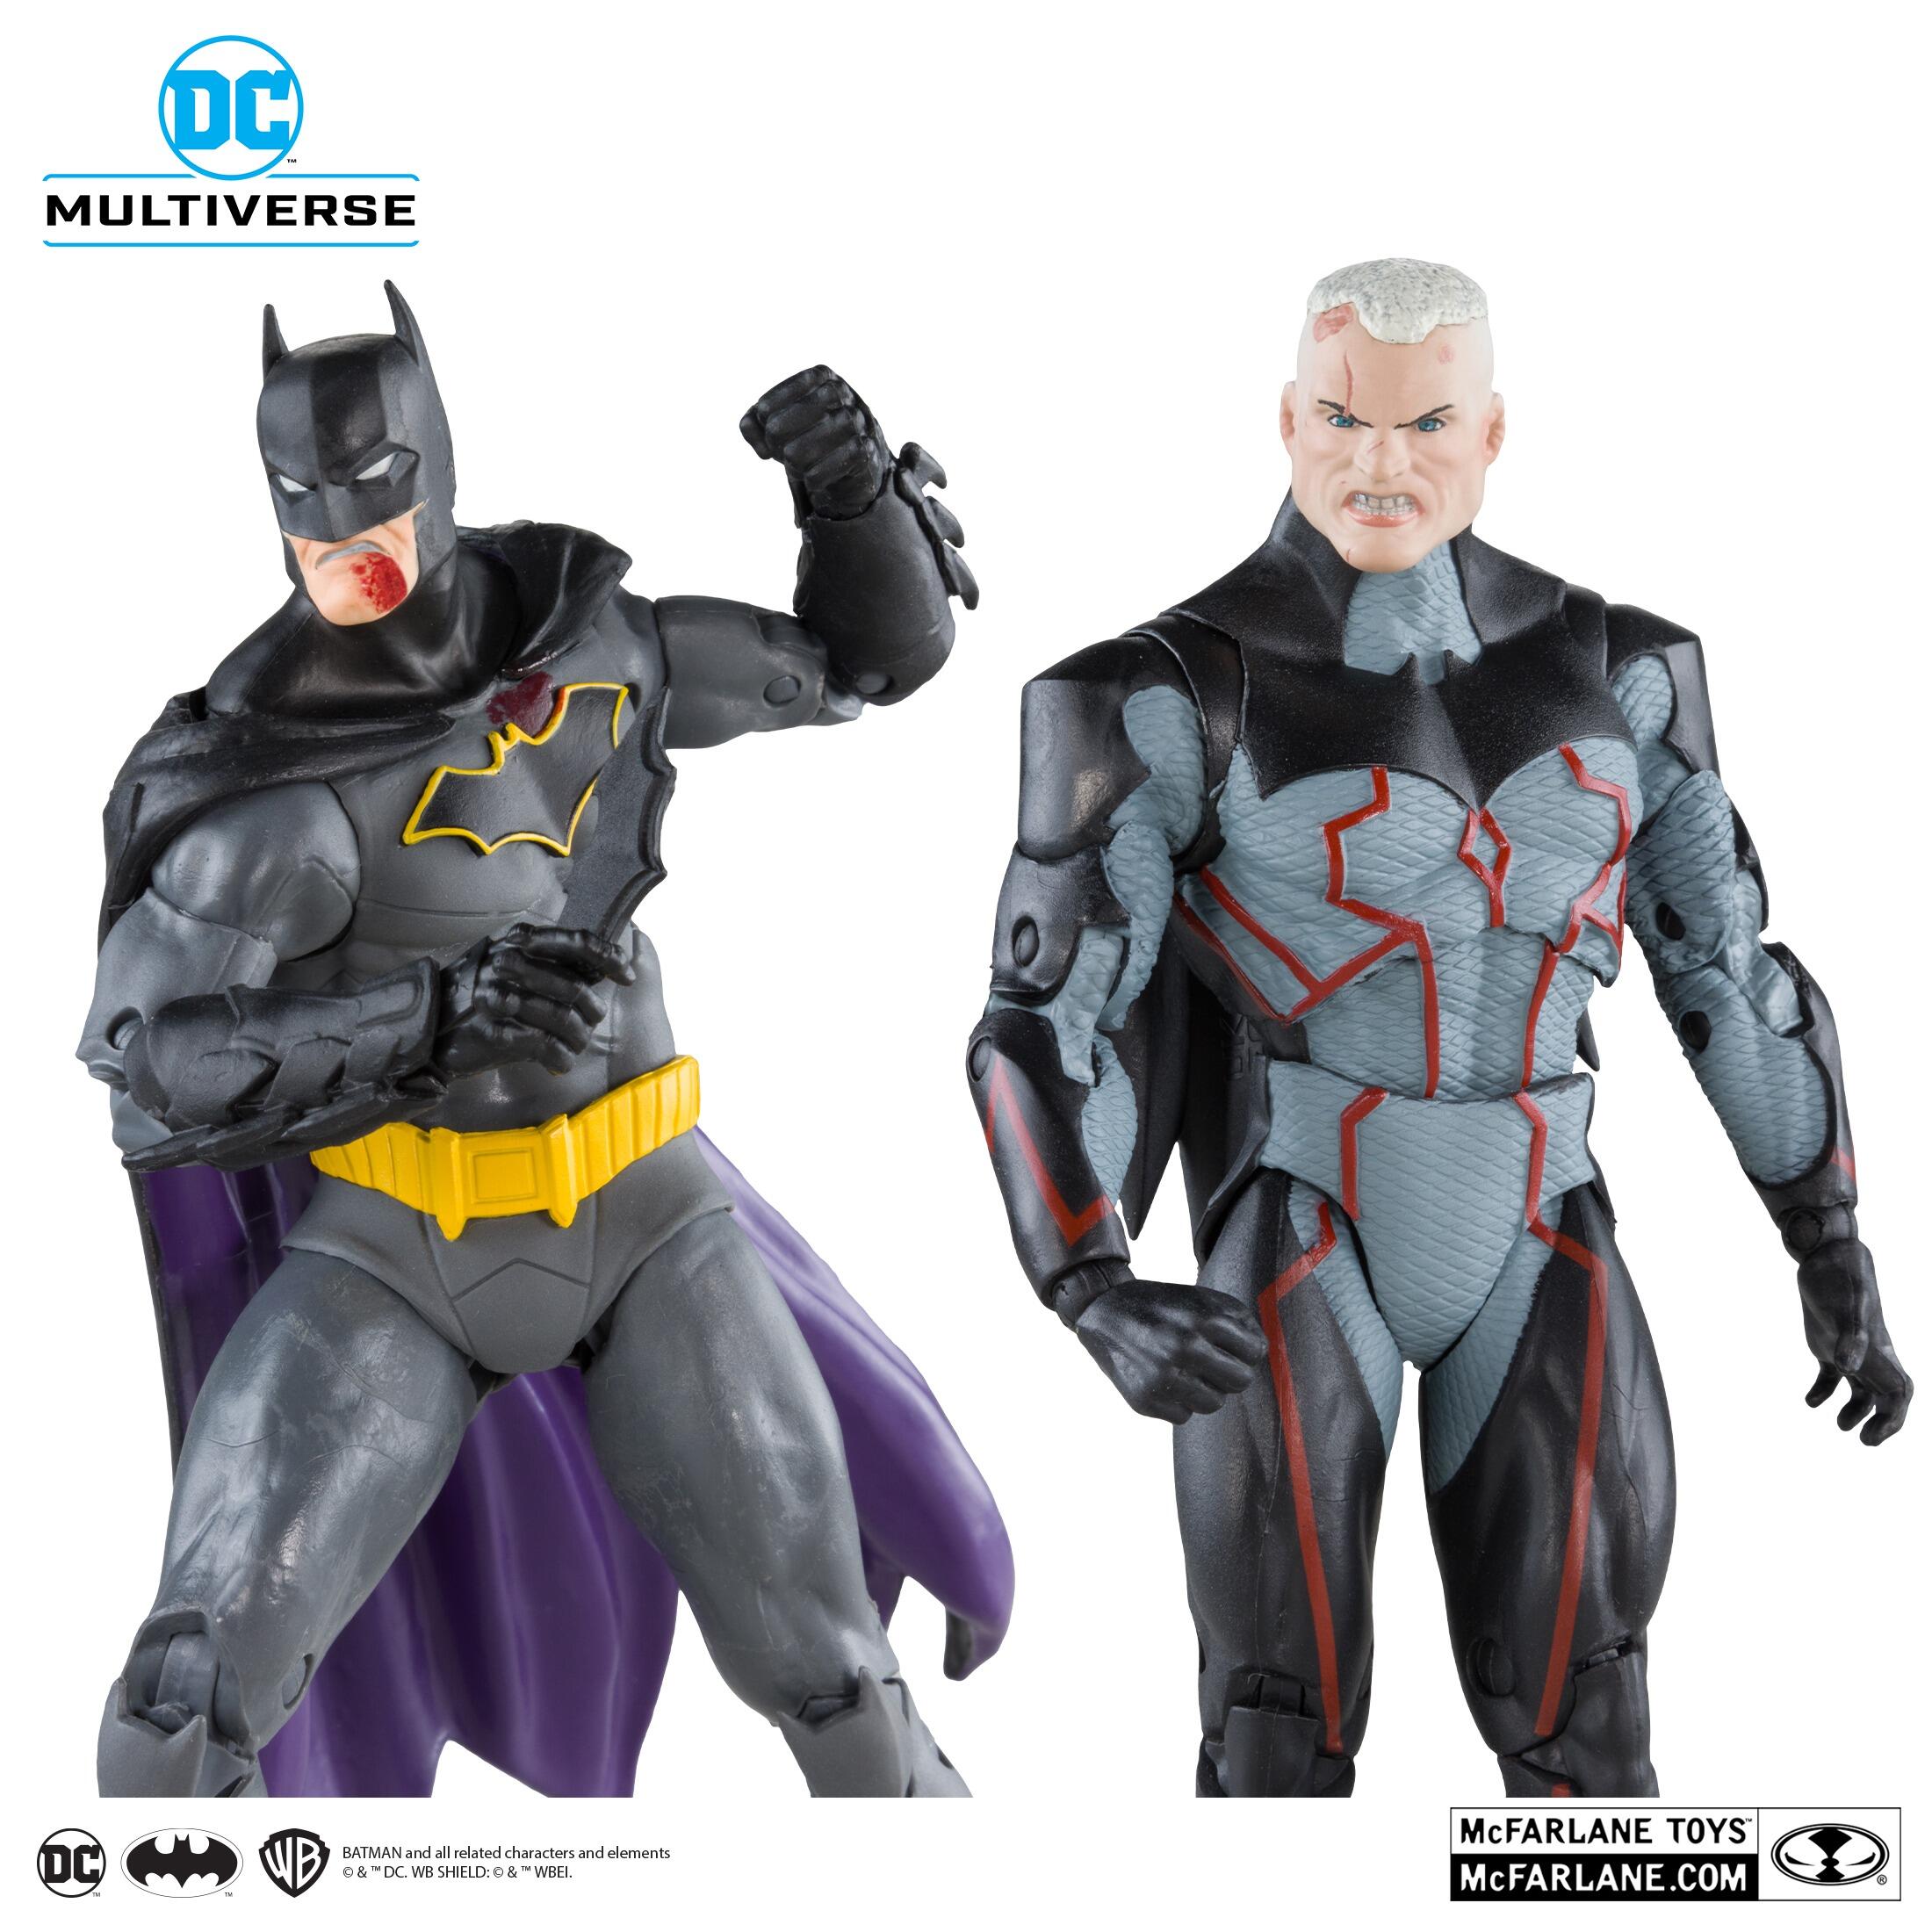 Batman Vs TMNT Action Figures Announced by DC Collectibles - Future of the  Force